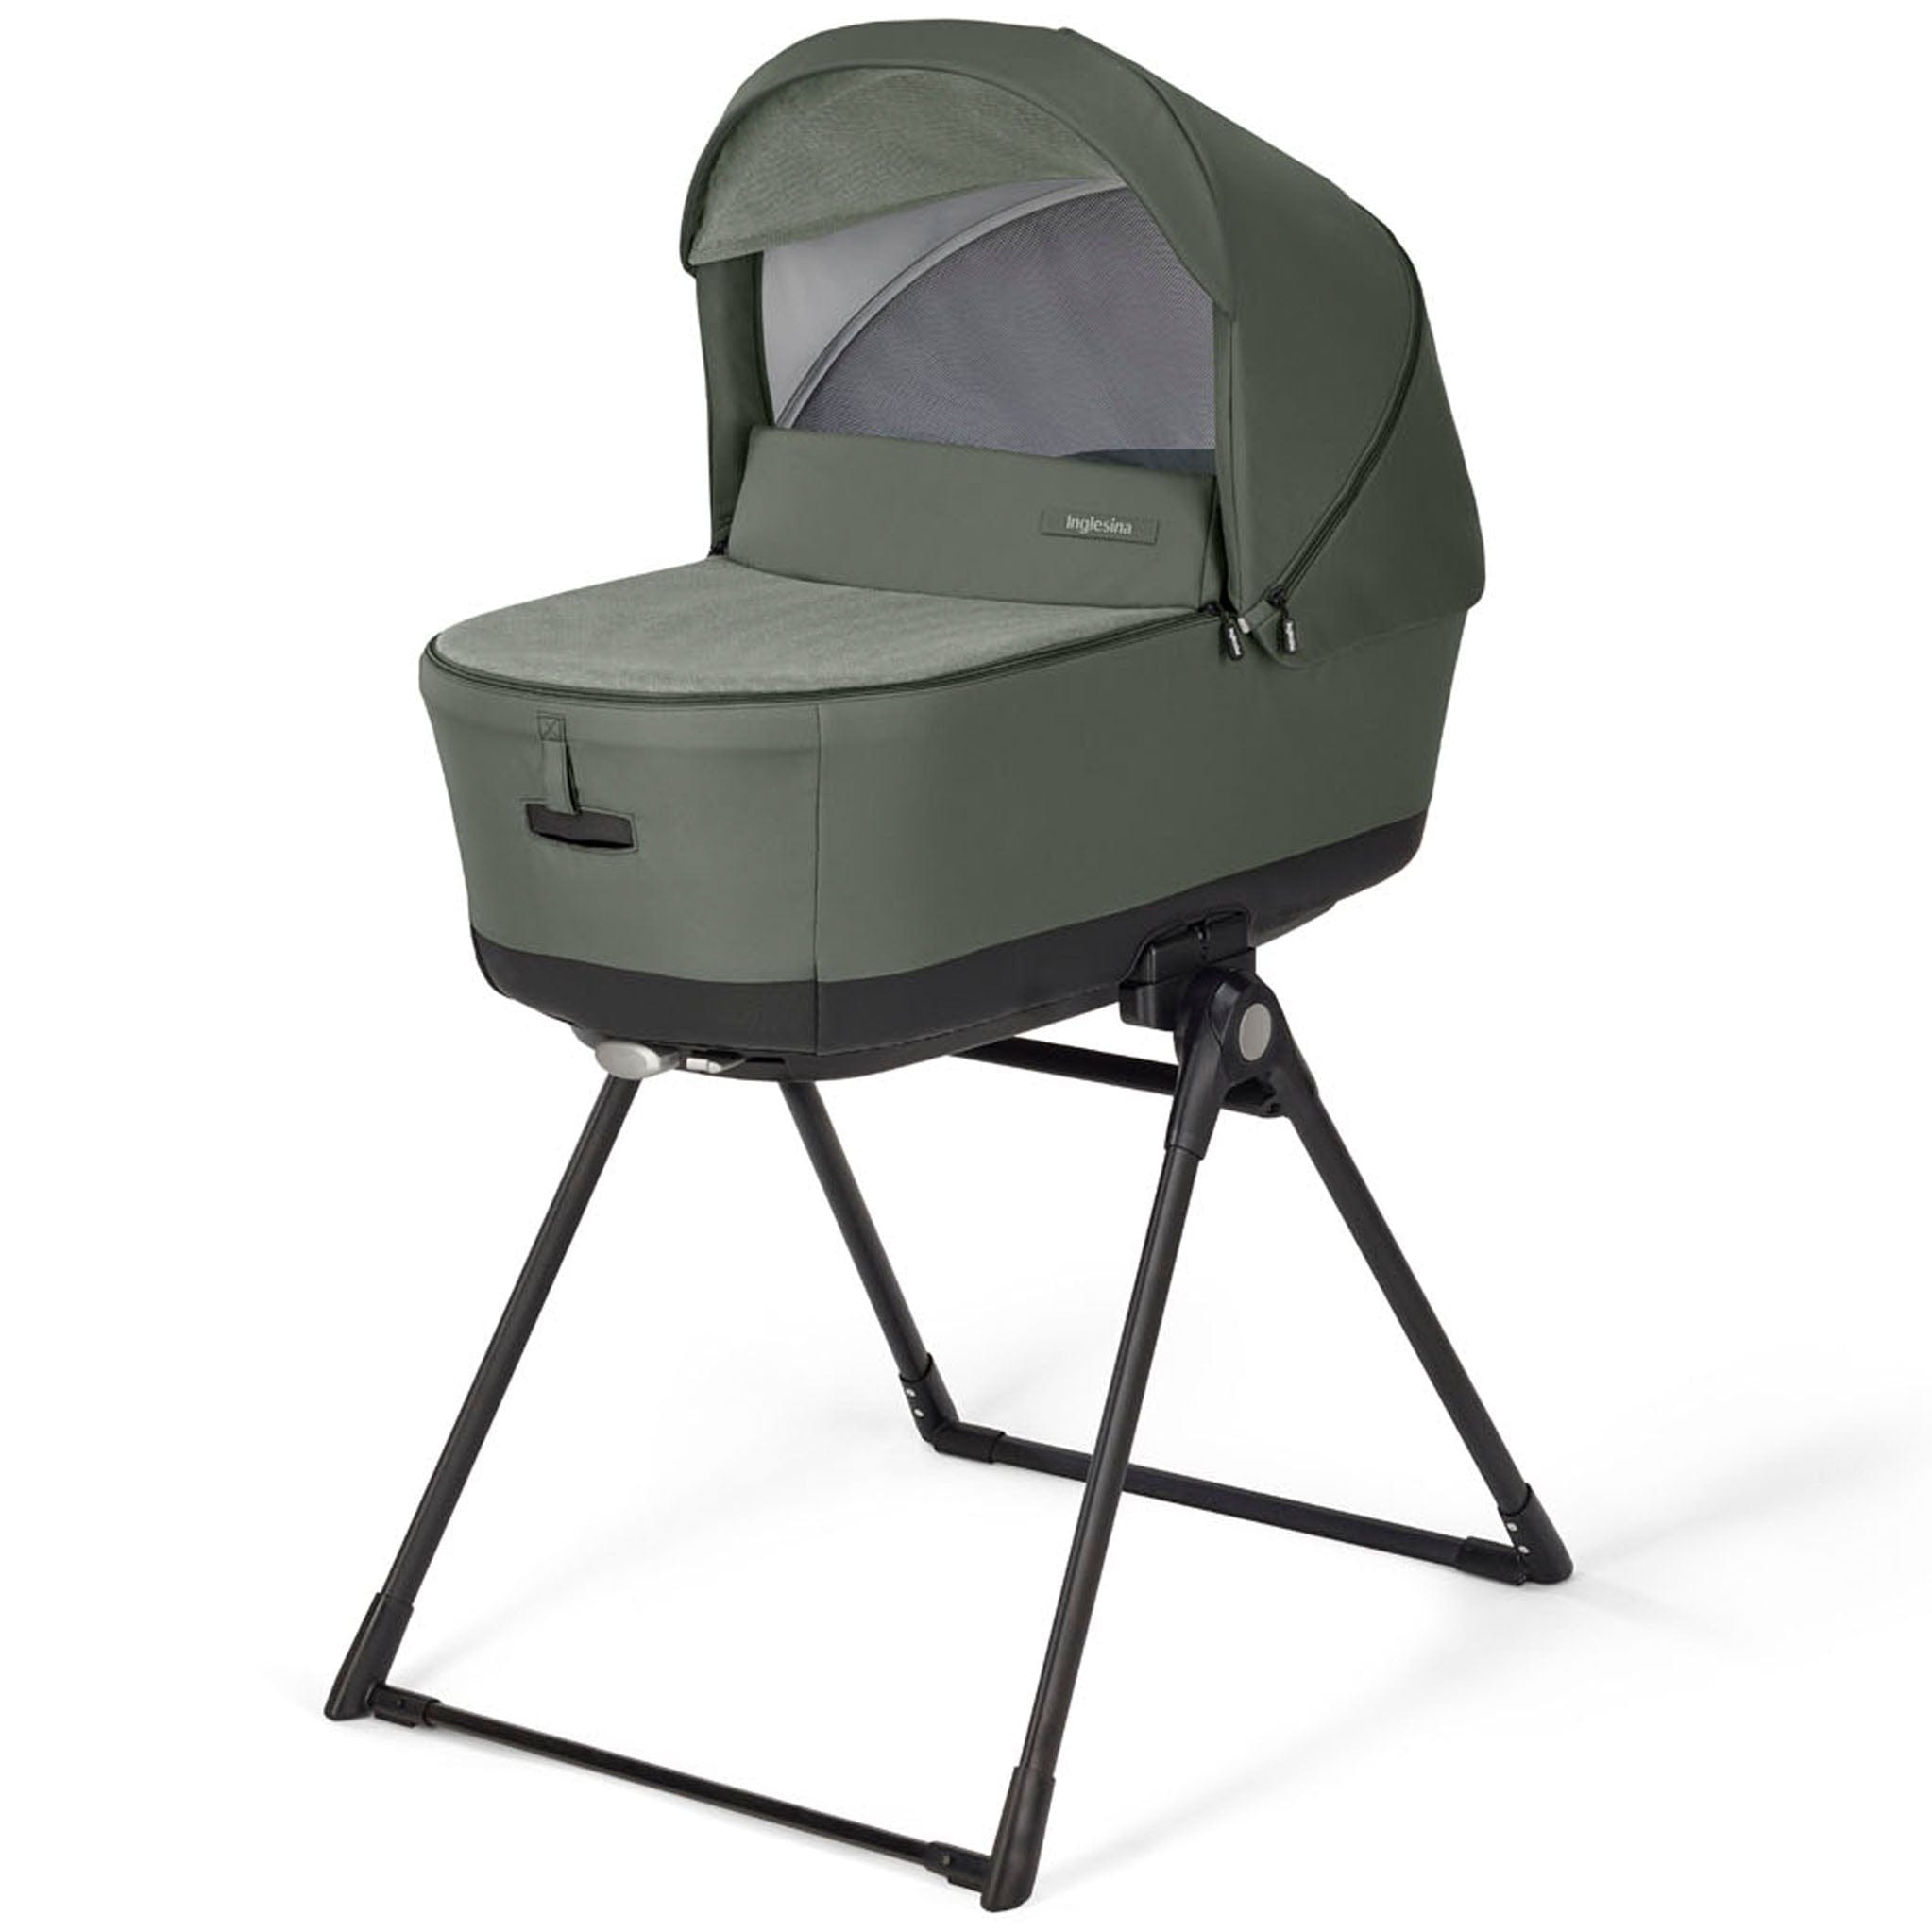 Inglesina Electa System Quattro in Tribeca Green with Darwin car seat and i-Size base Travel Systems ELC-TRI-GRE 8029448084153